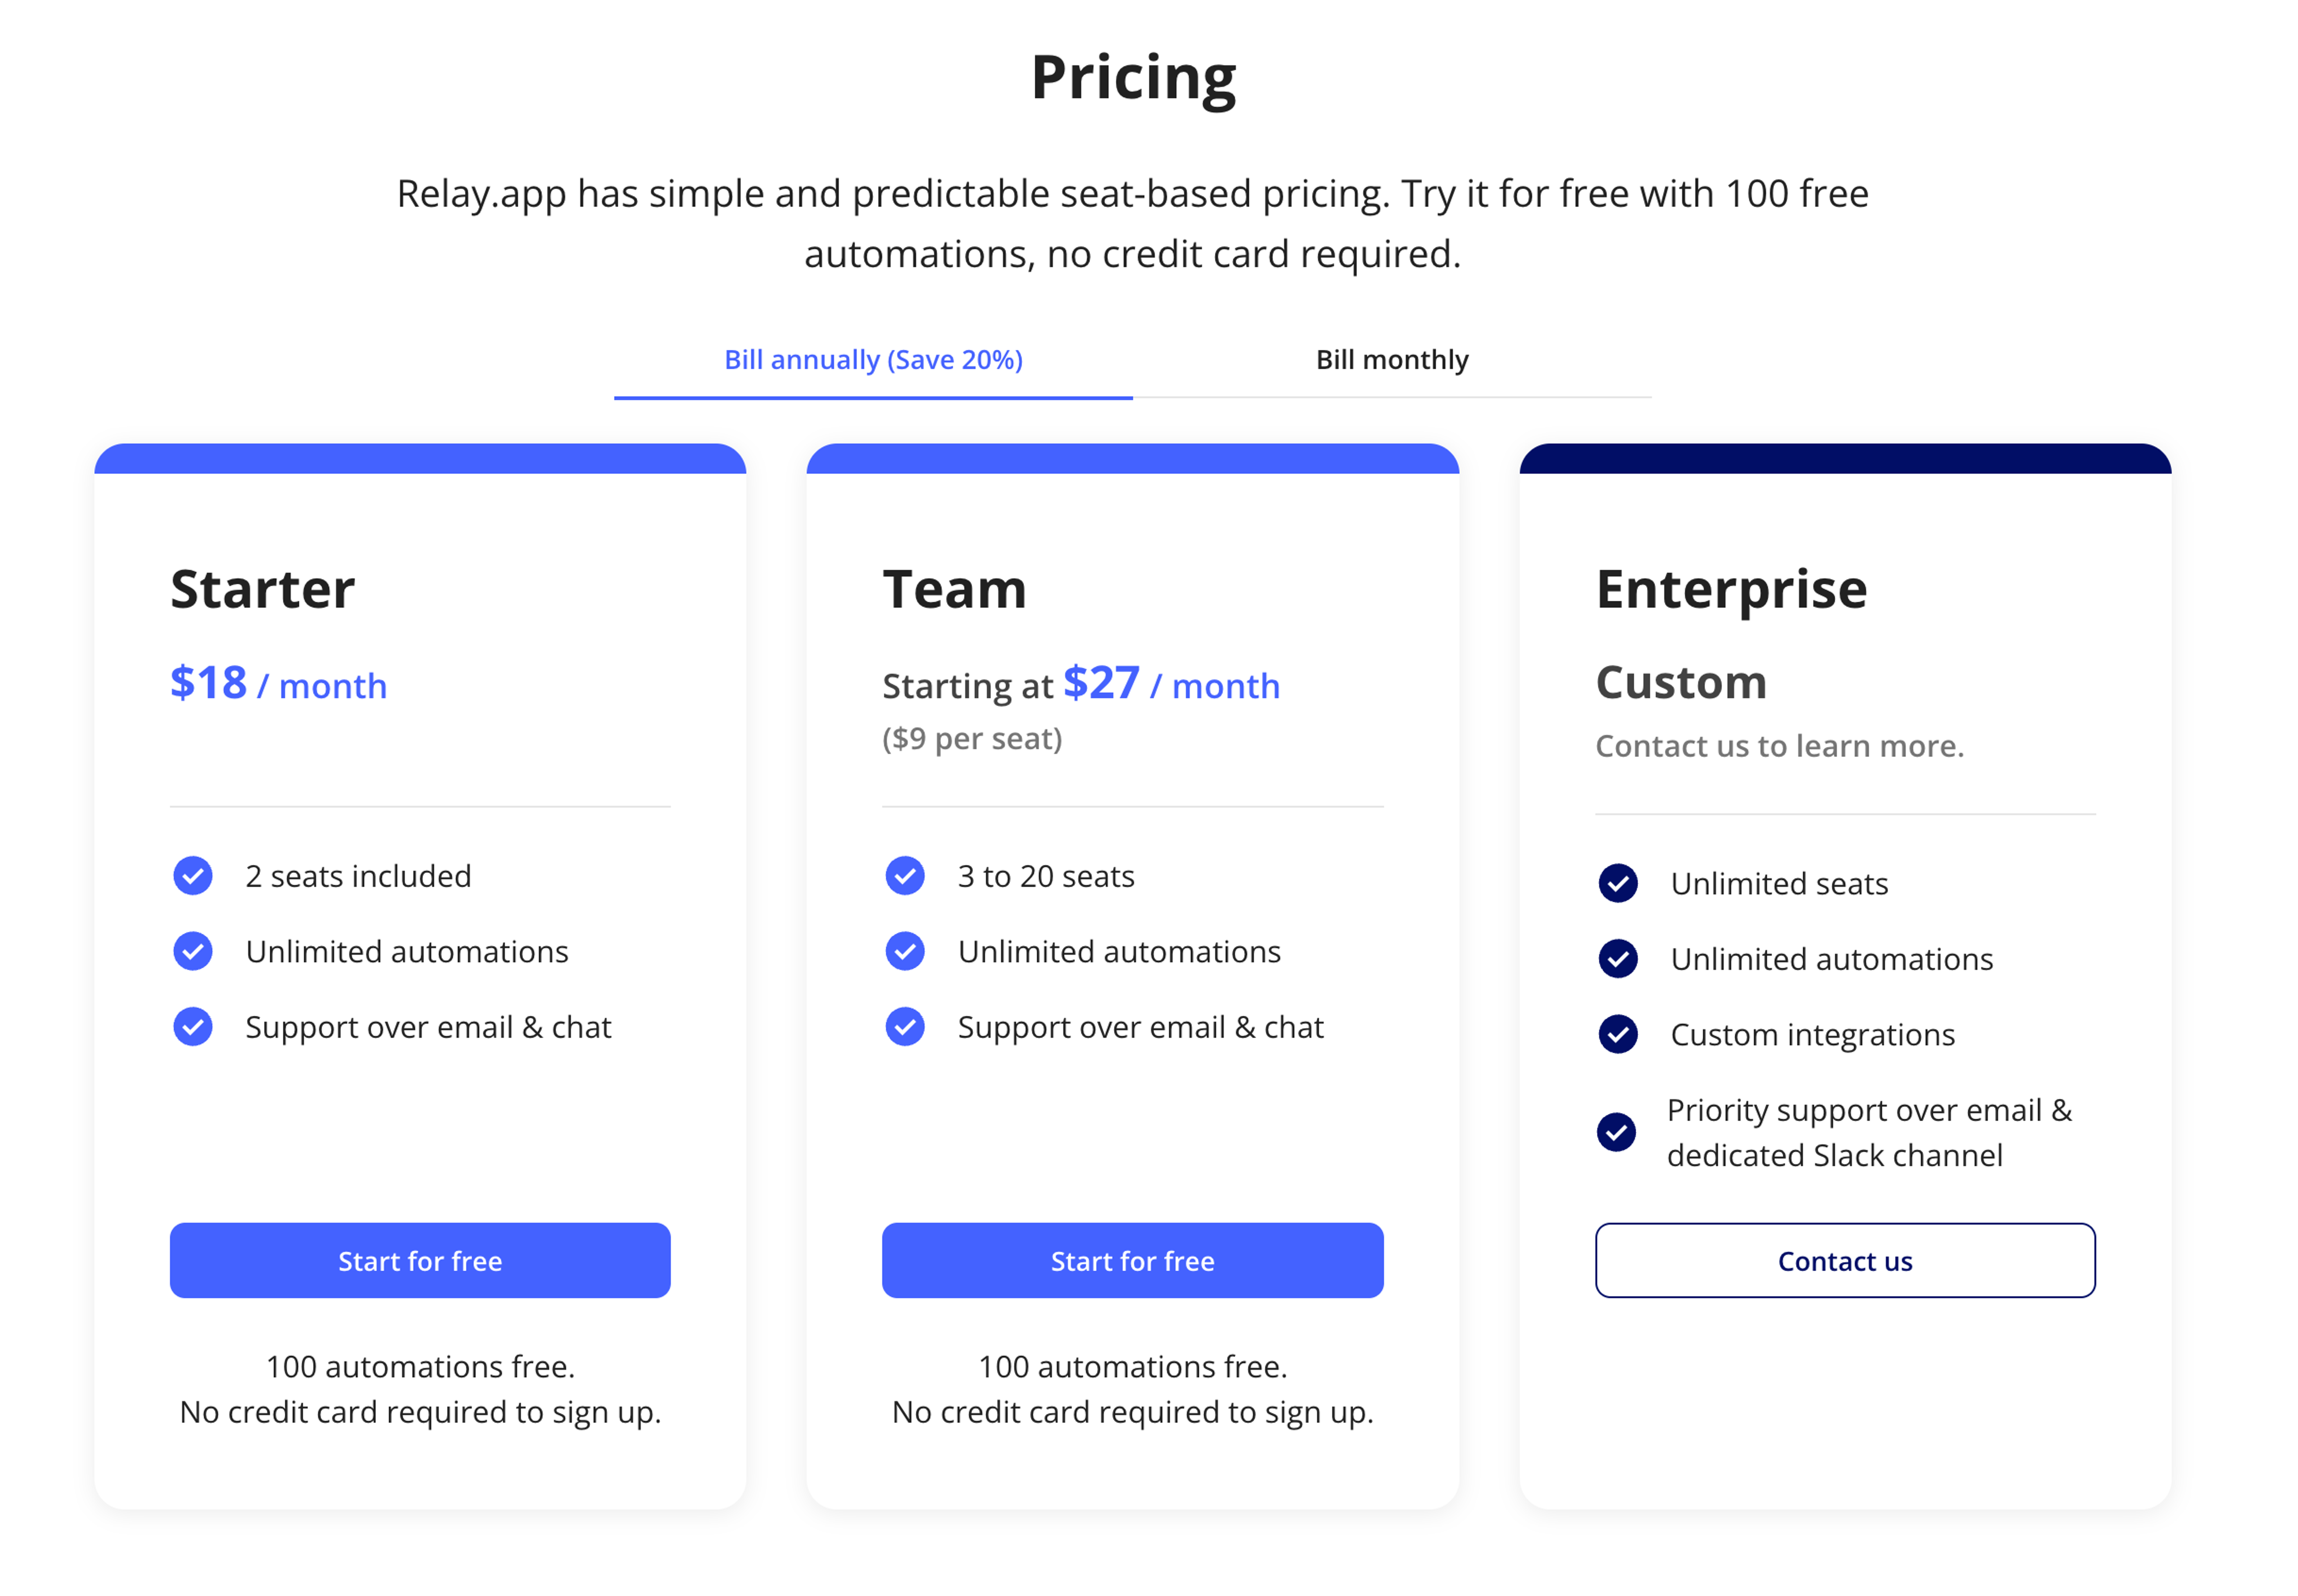 Relay.app pricing